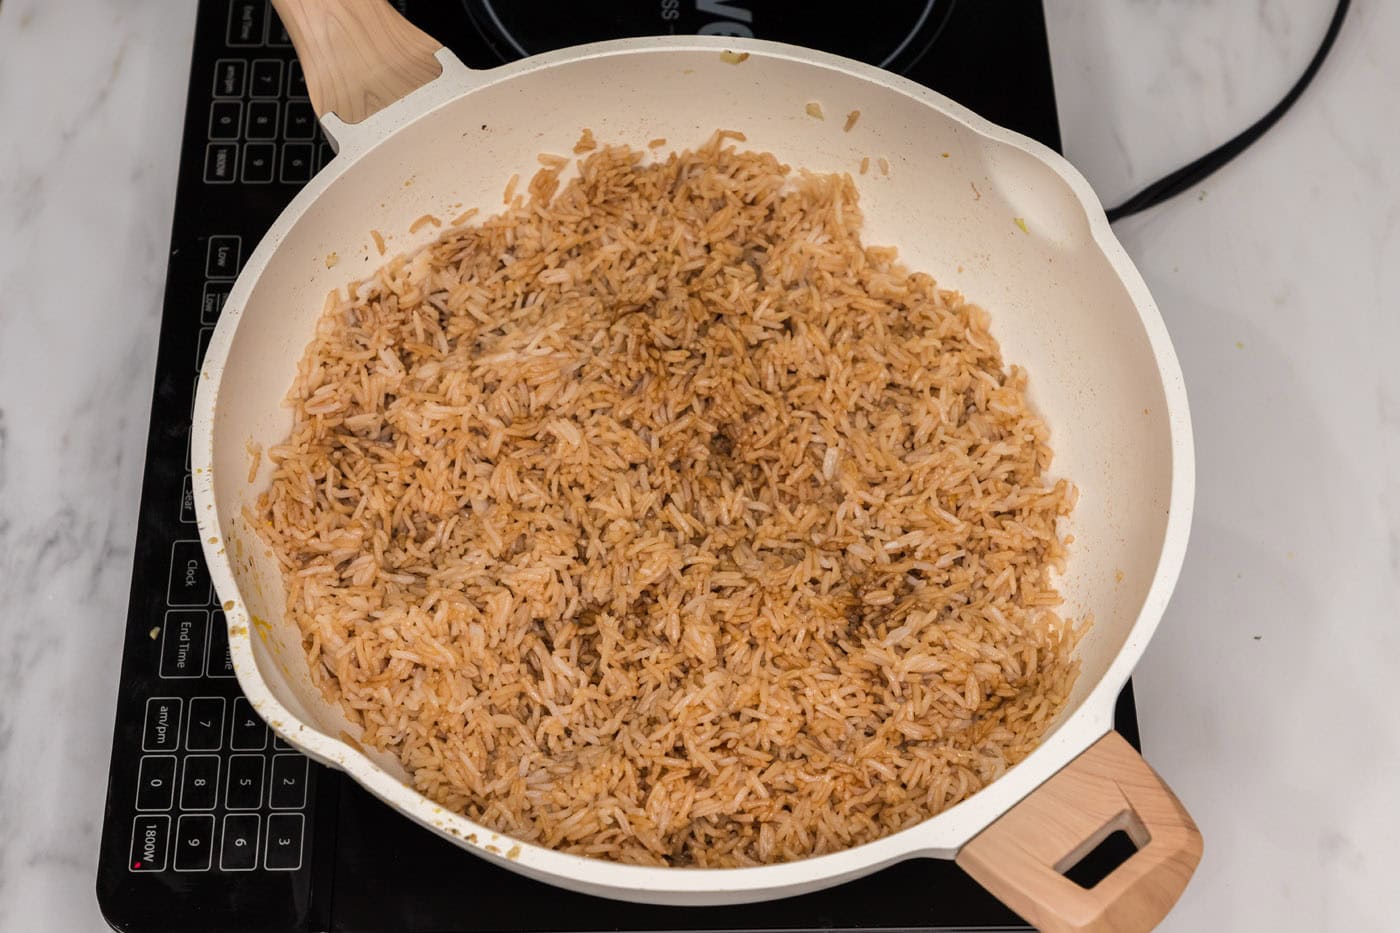 soy sauce and oyster sauce mixed with rice in a skillet